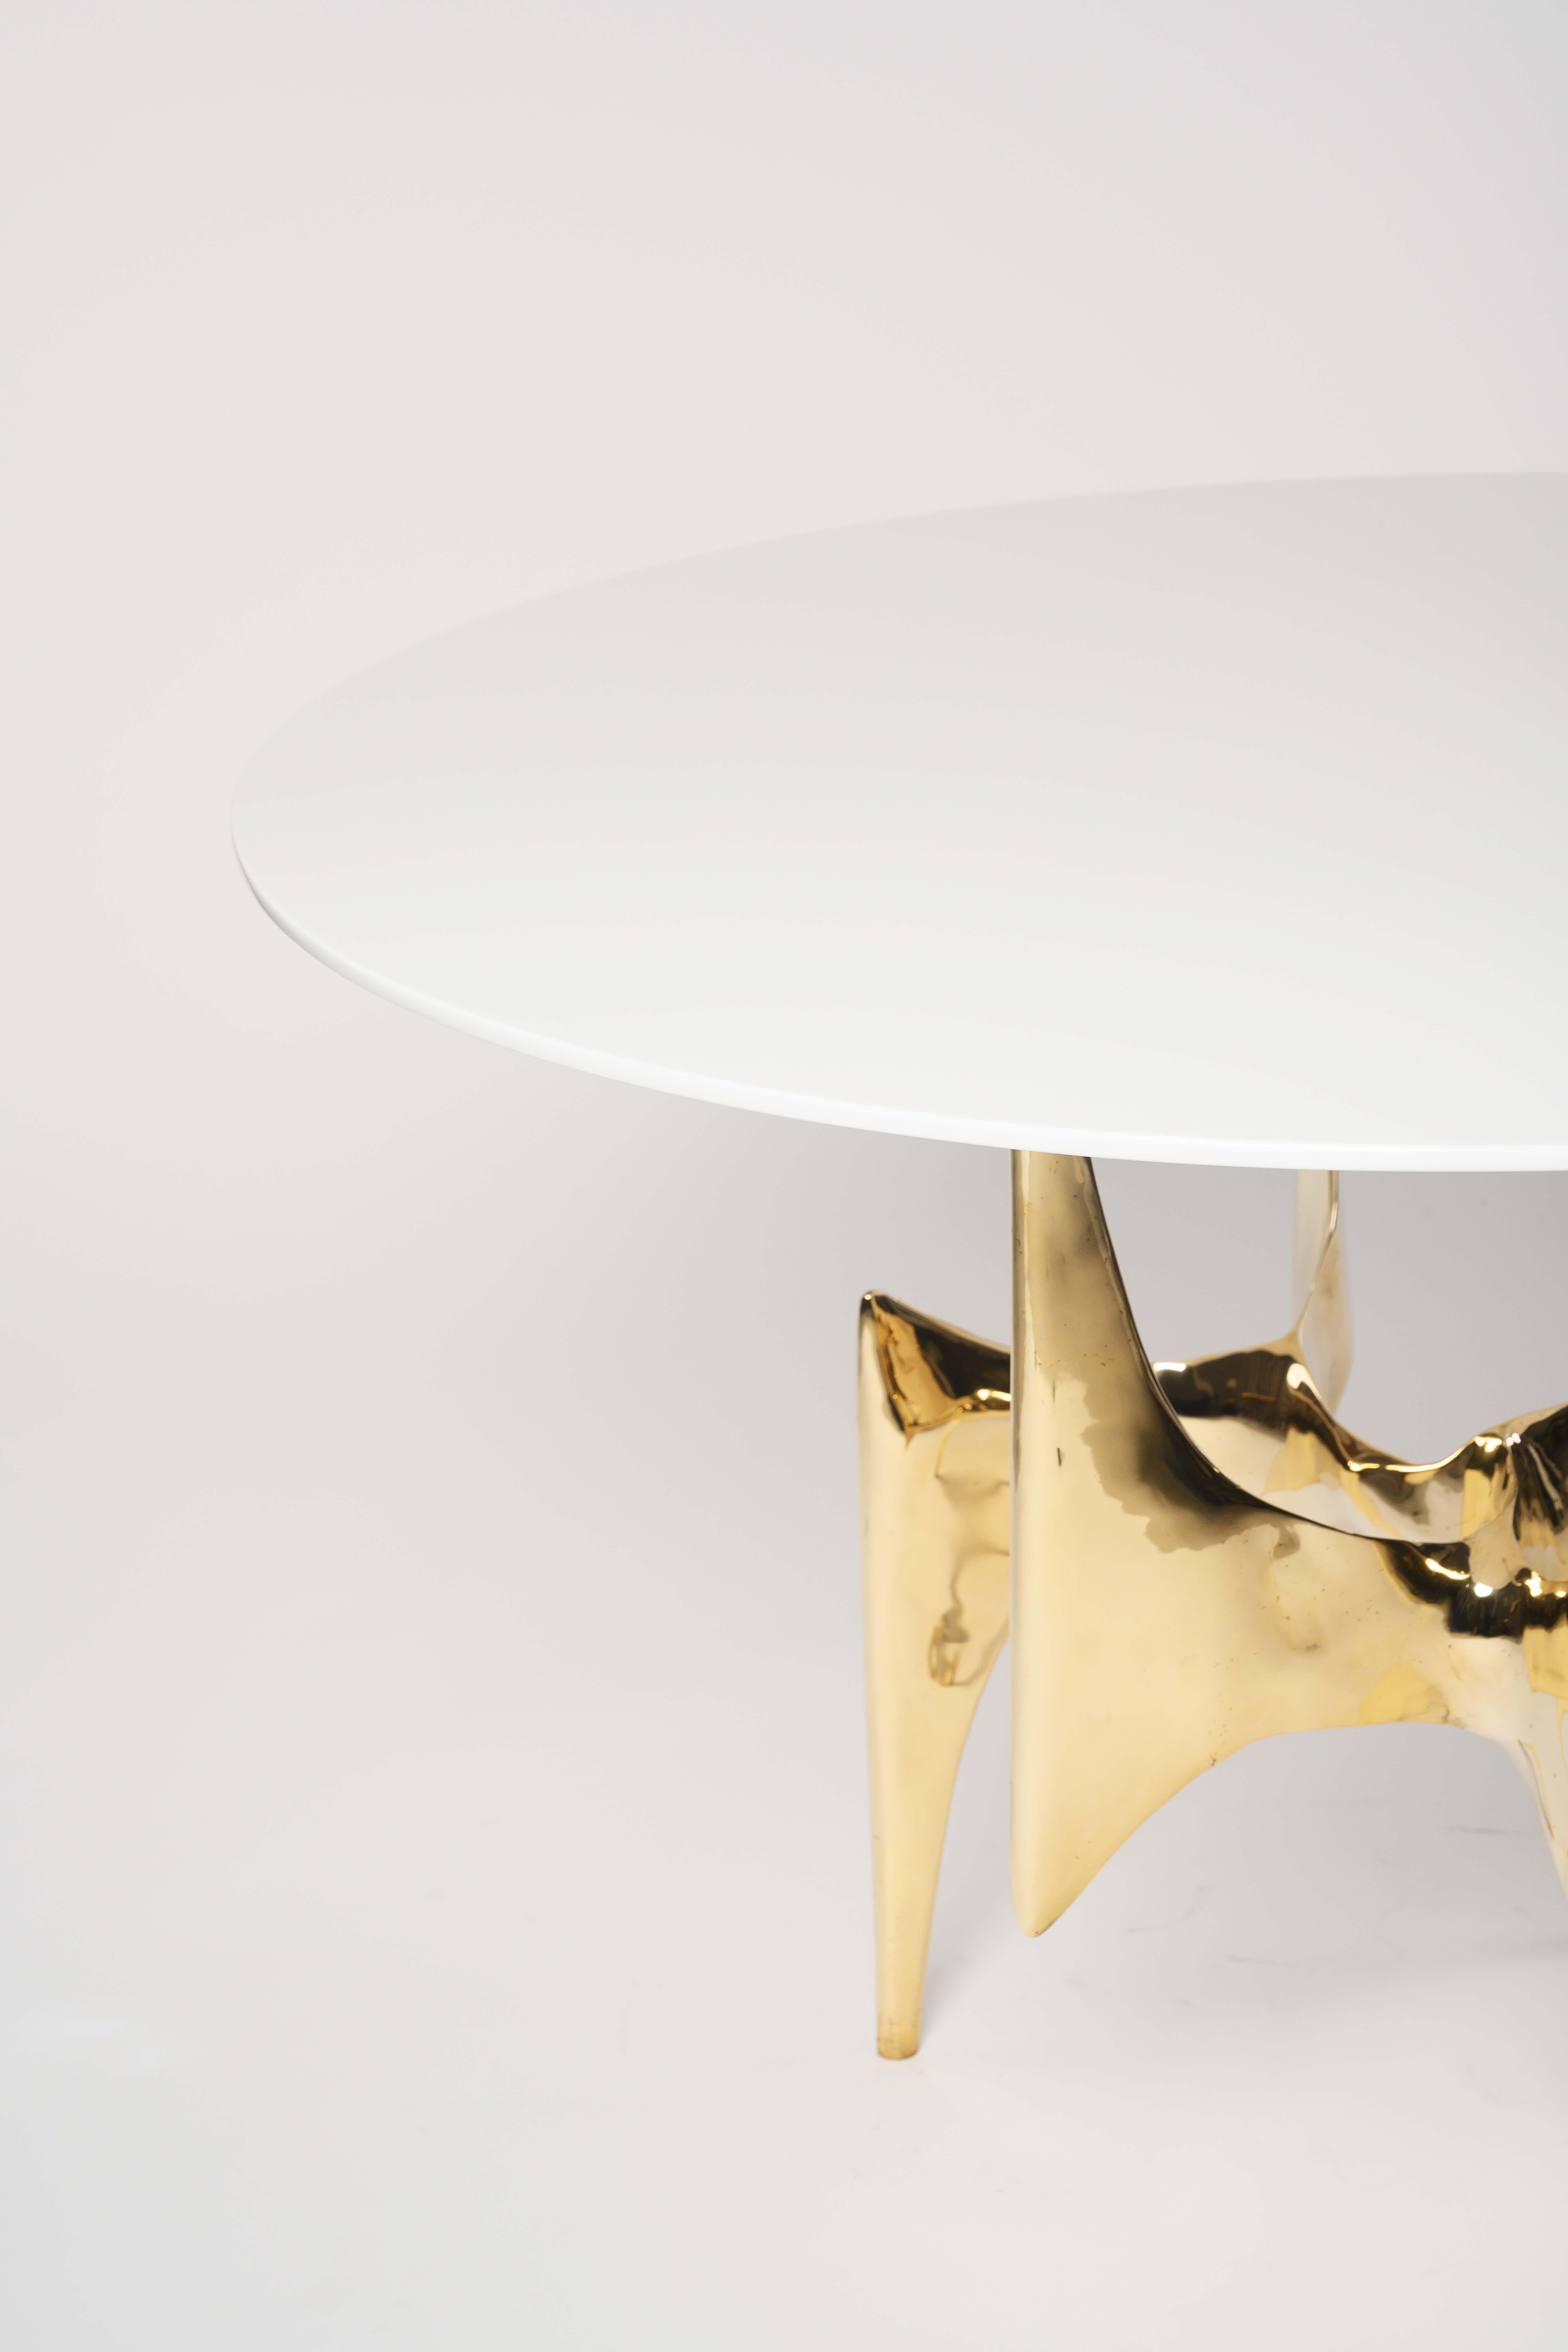 European Ella Table in Polished Gold Bronze with White Gloss Top by Elan Atelier